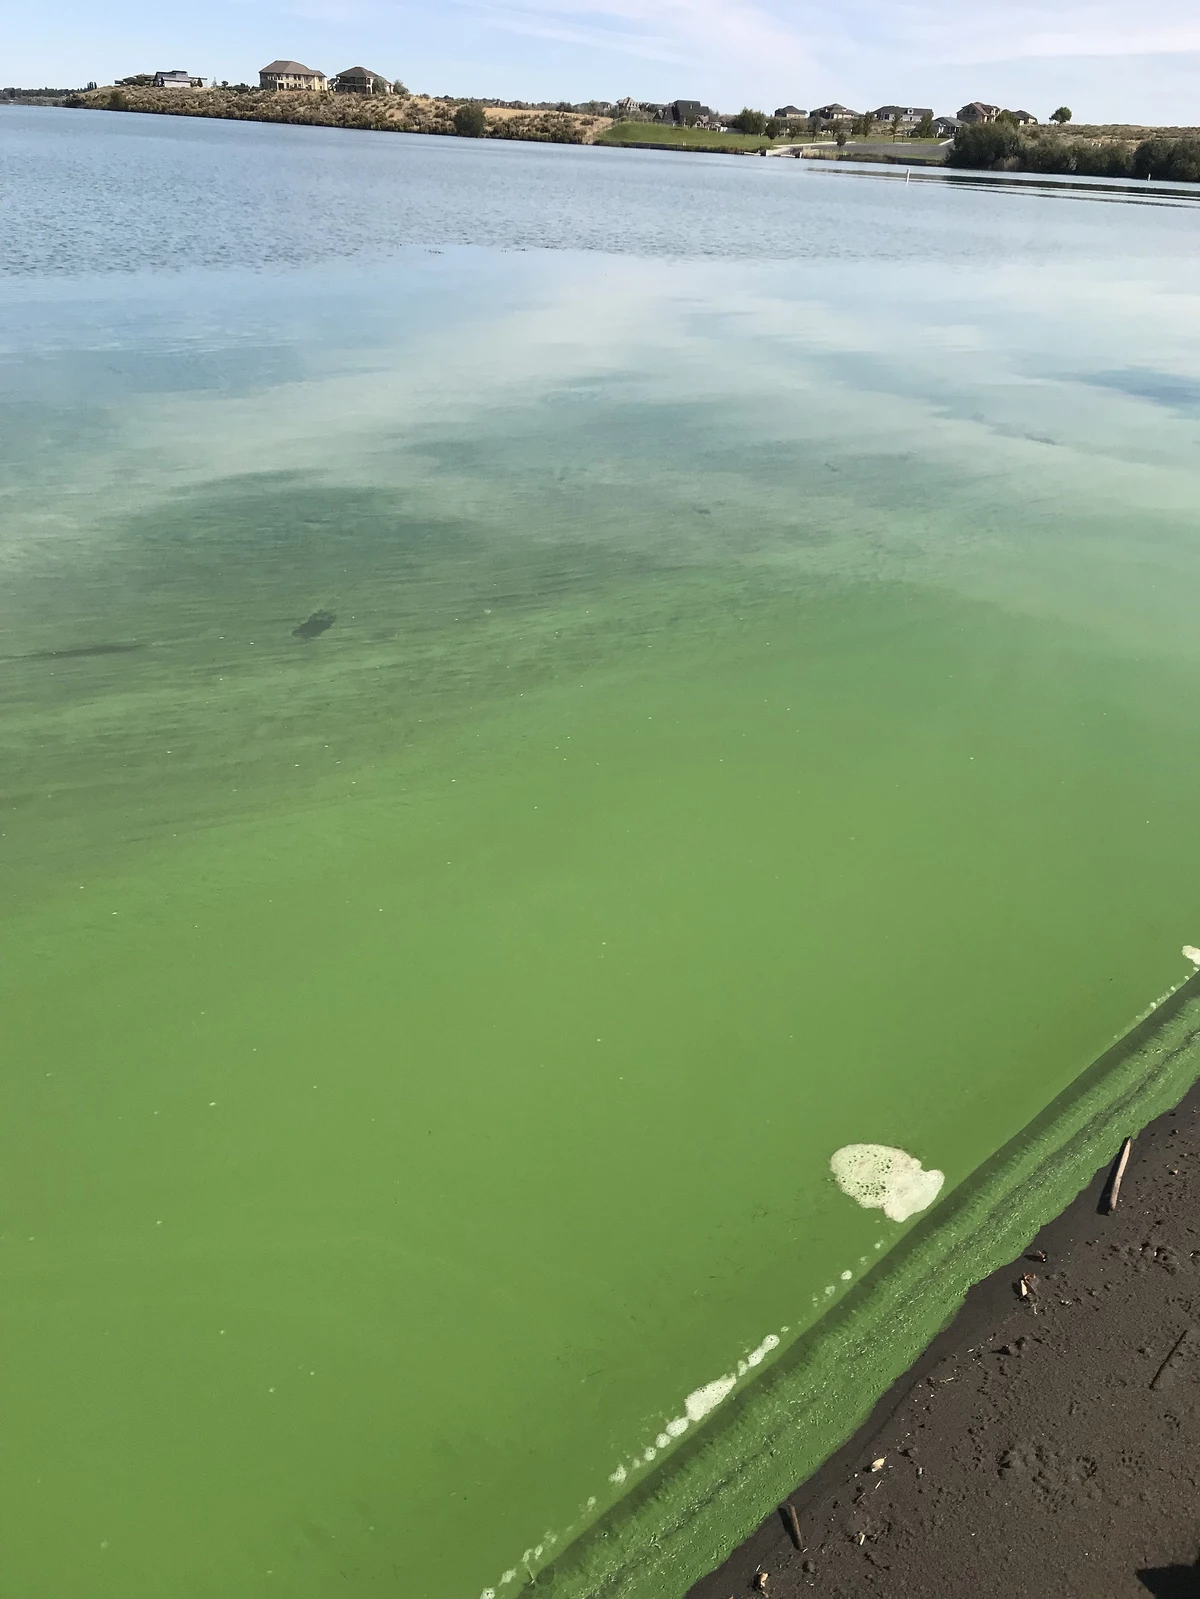 Toxic Algae Found in Lake Officials Warn Stay Away Until Clear